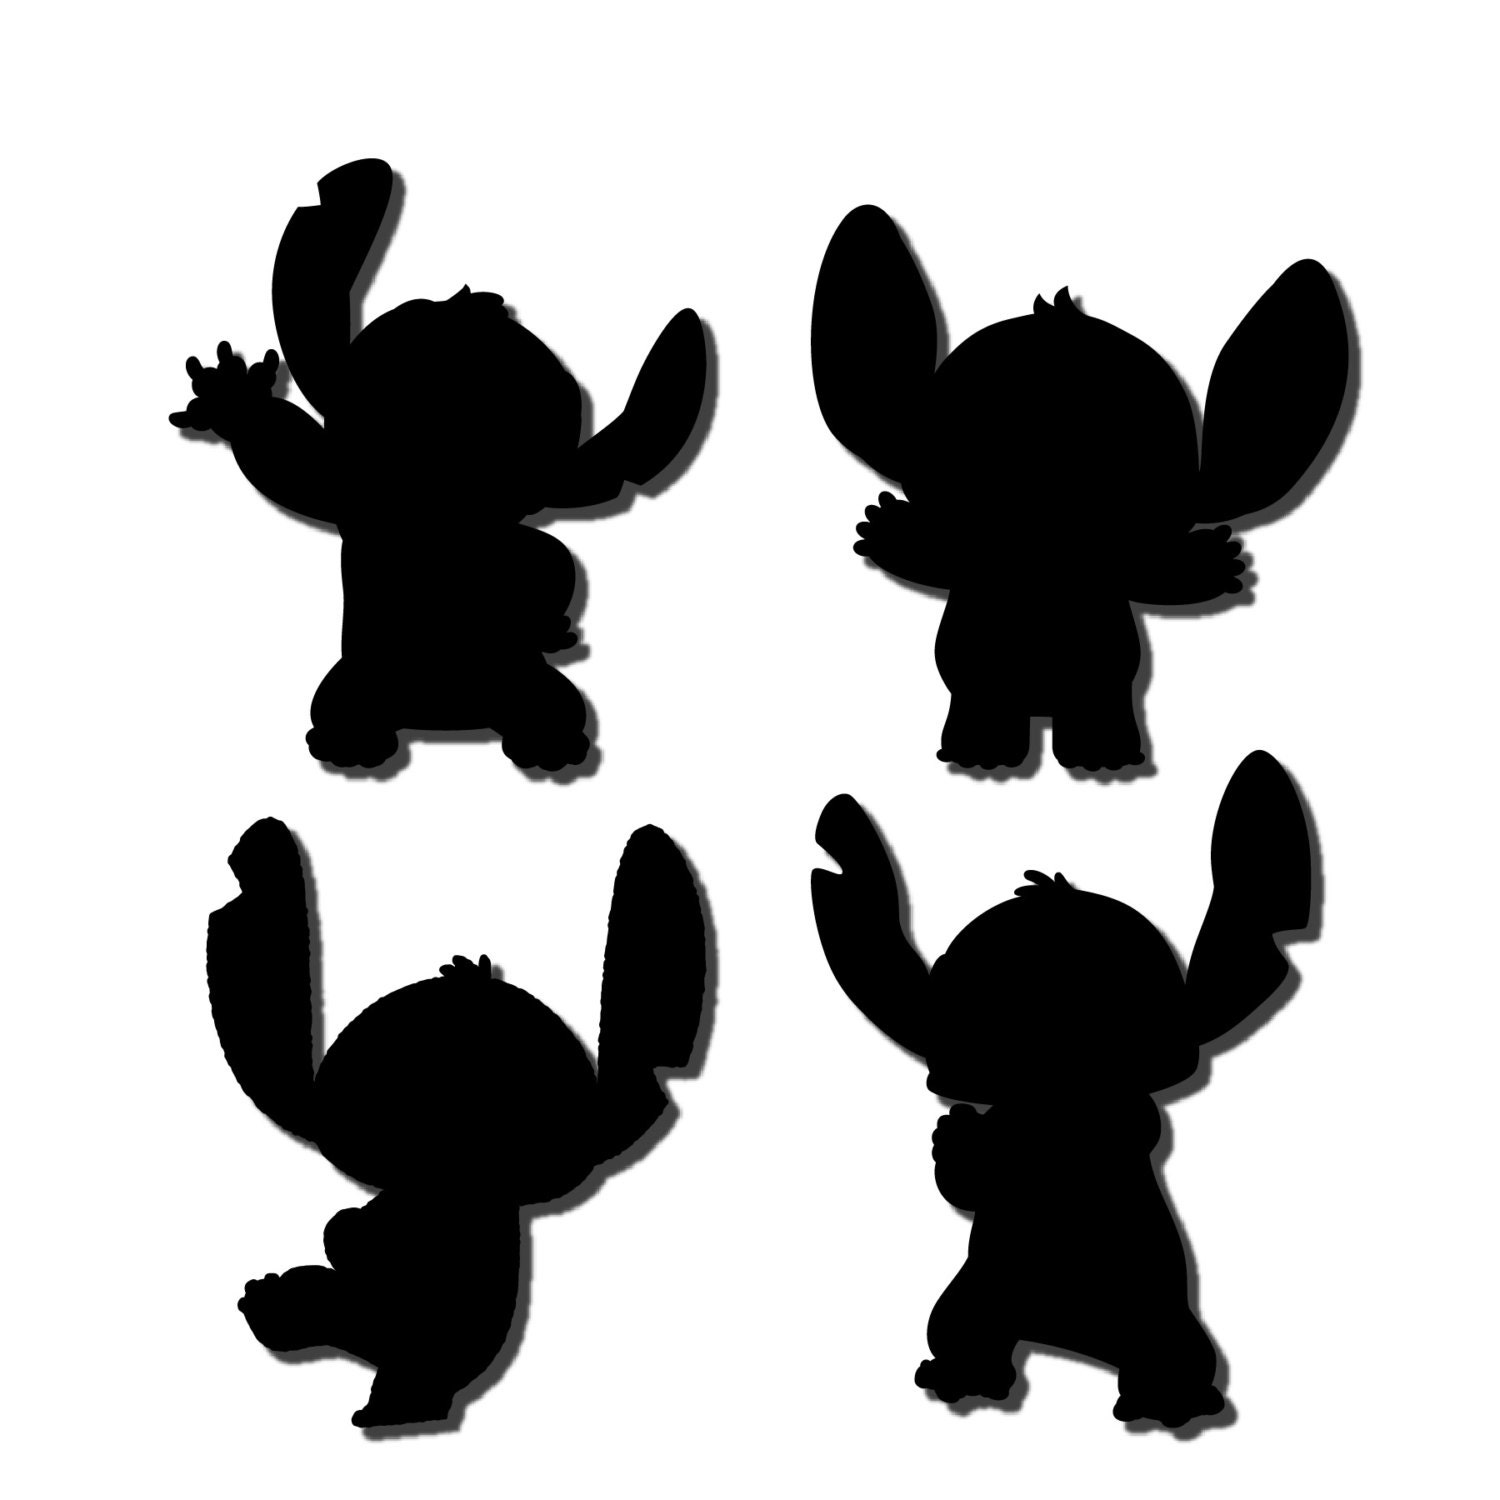 Download Lilo & Stitch svg dxf cut file Instant Download by 5SHP on Etsy